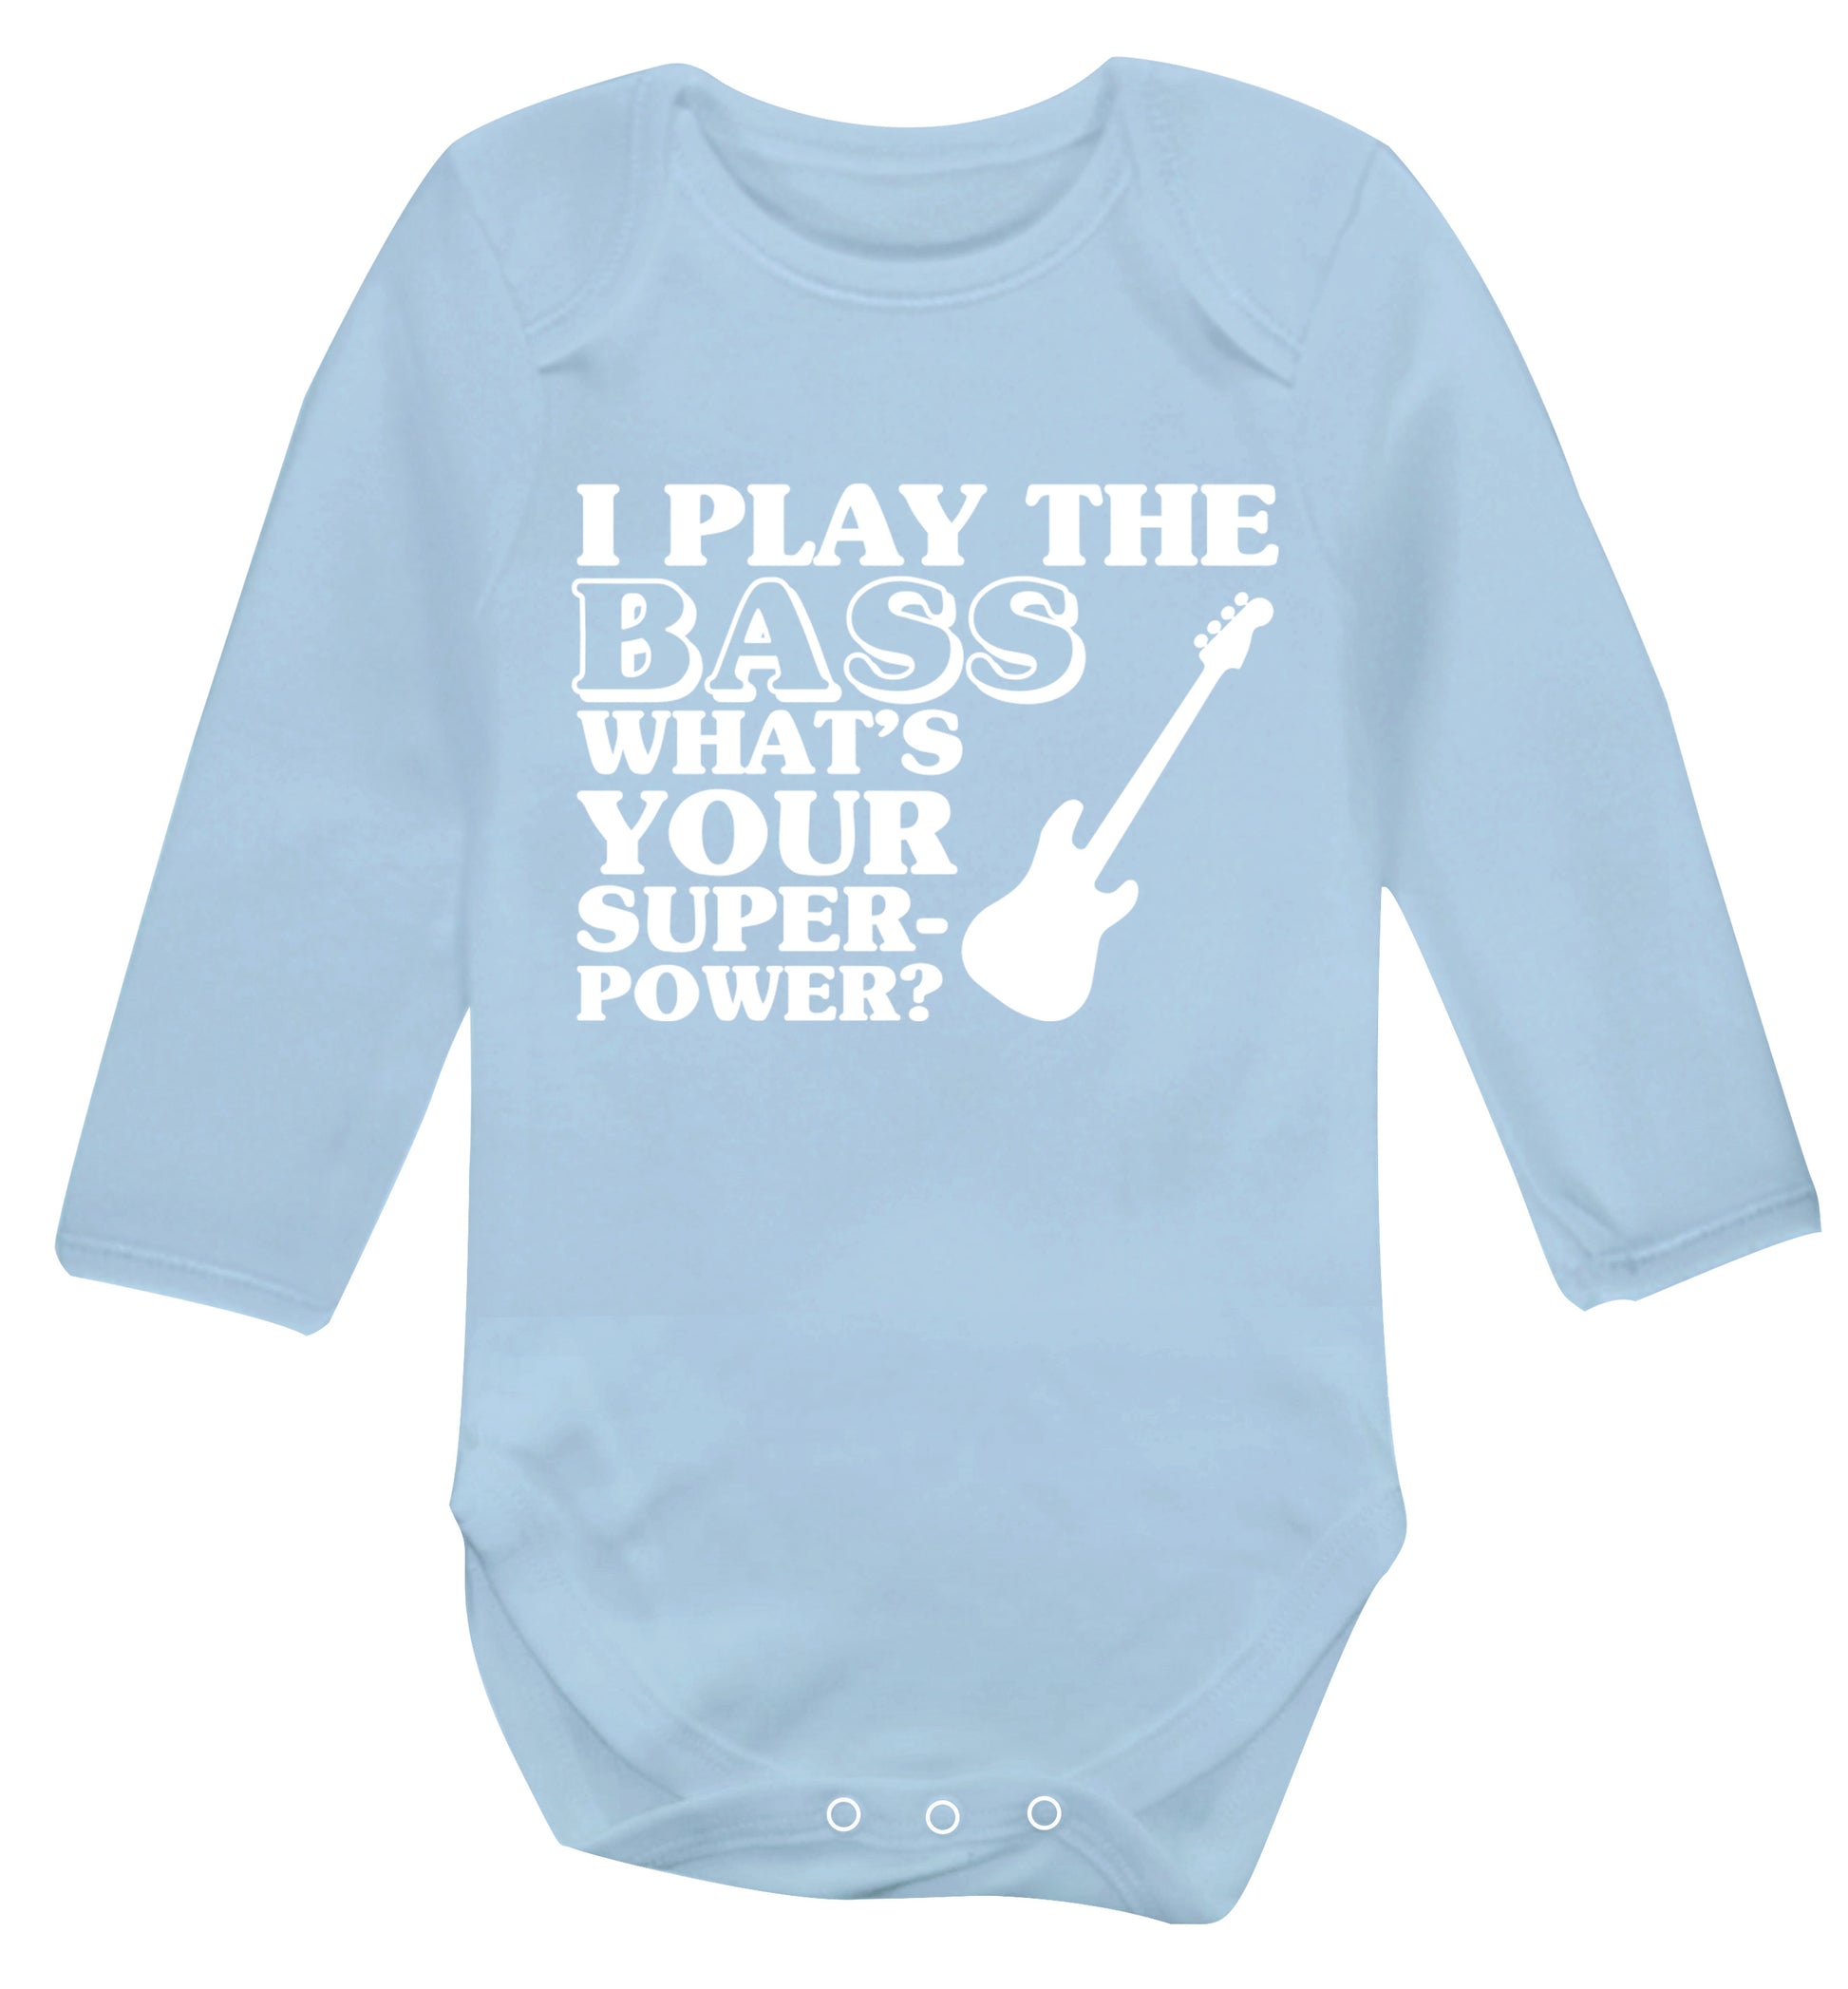 I play the bass what's your superpower? Baby Vest long sleeved pale blue 6-12 months